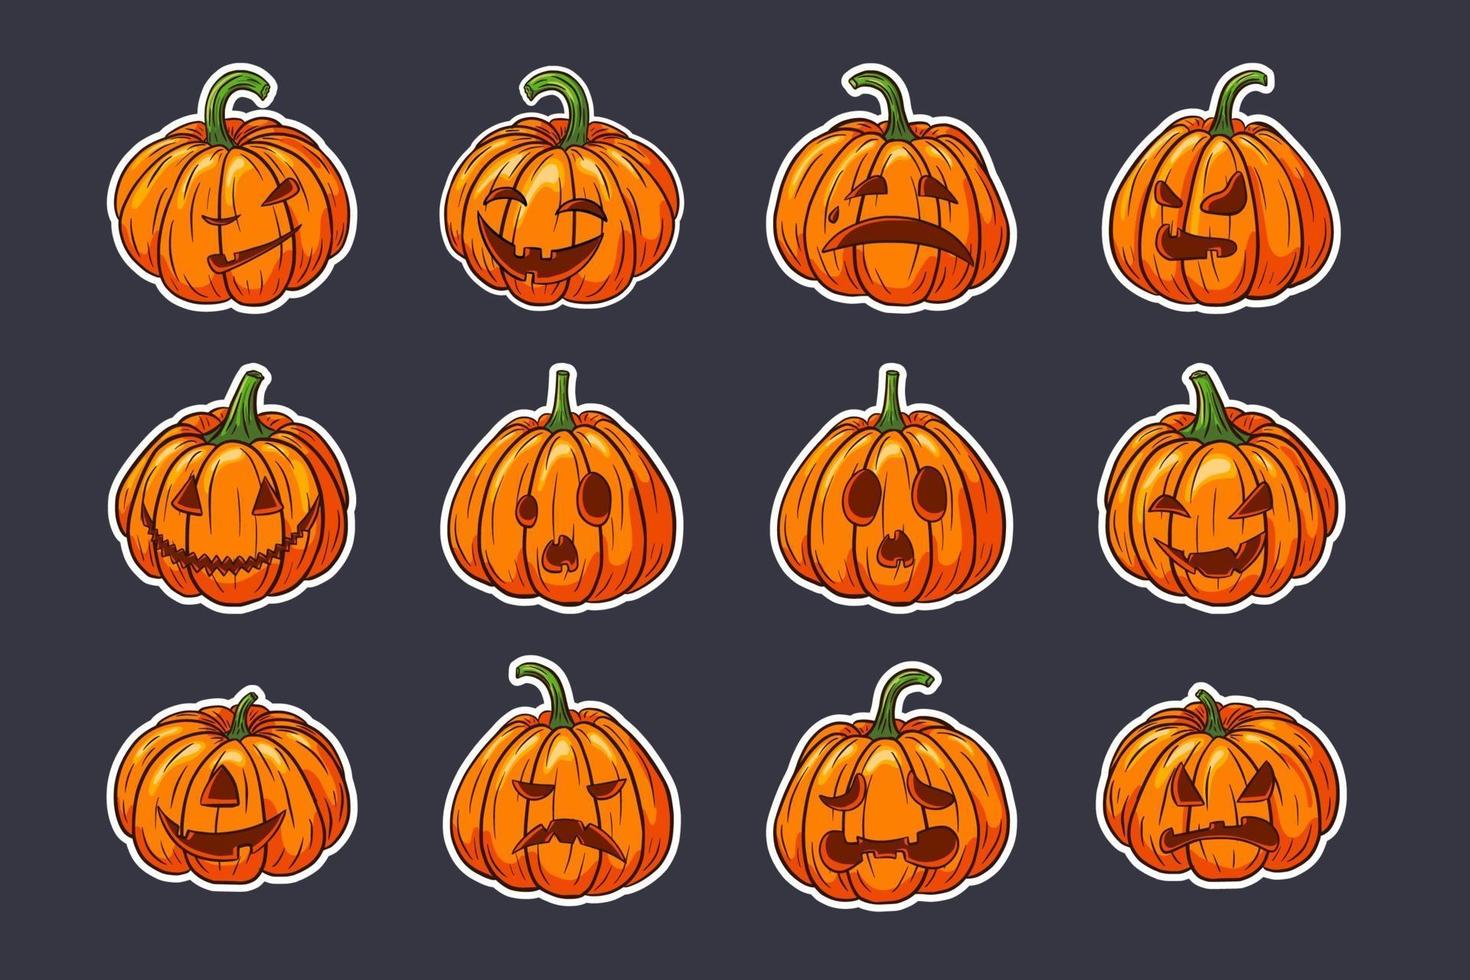 Spooky Pumpkins with Faces Halloween Stickers Set vector